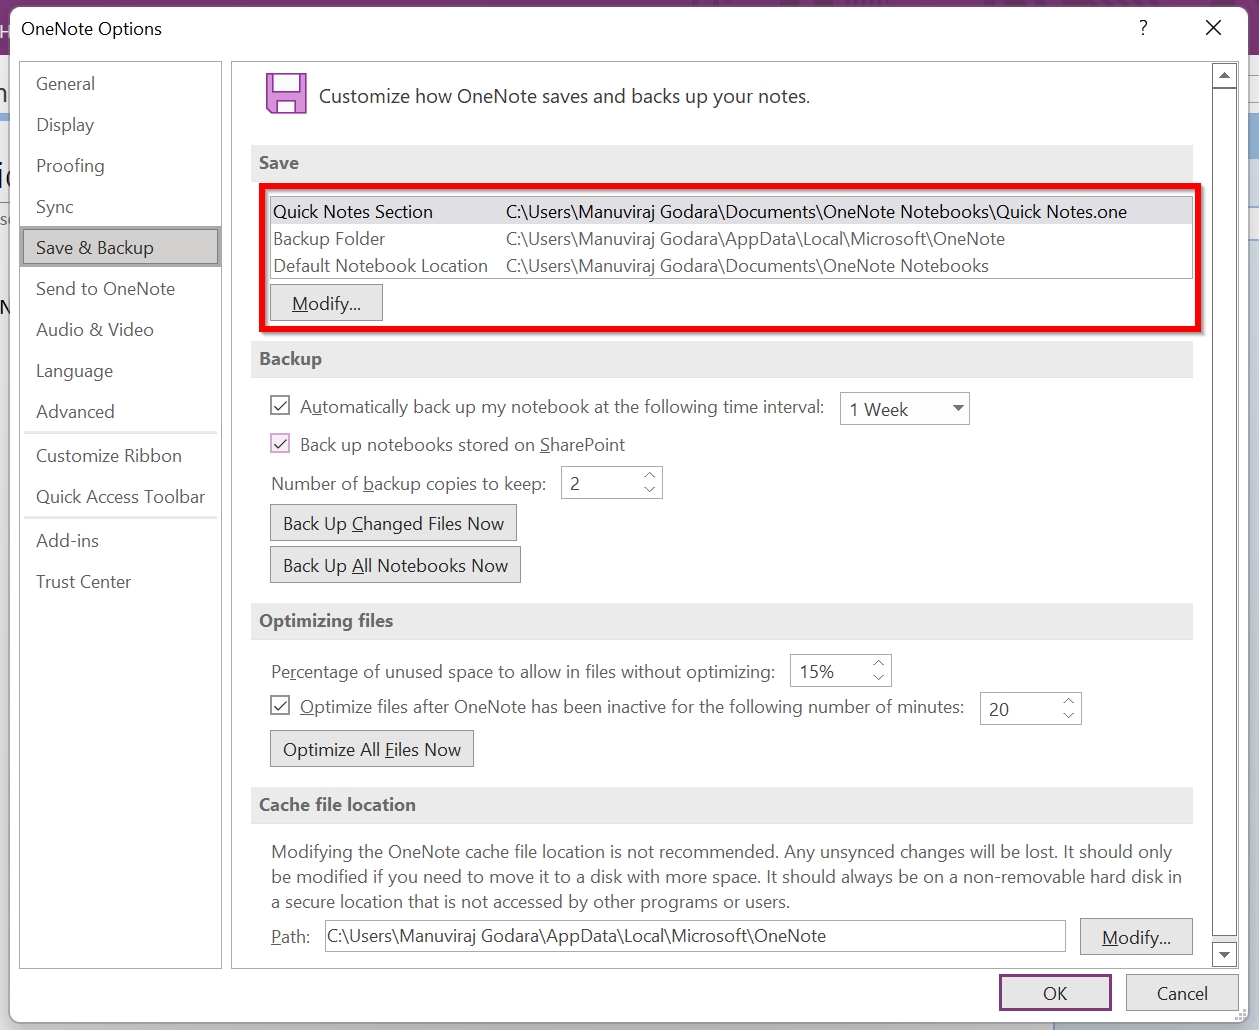 Save & Backup option in OneNote.